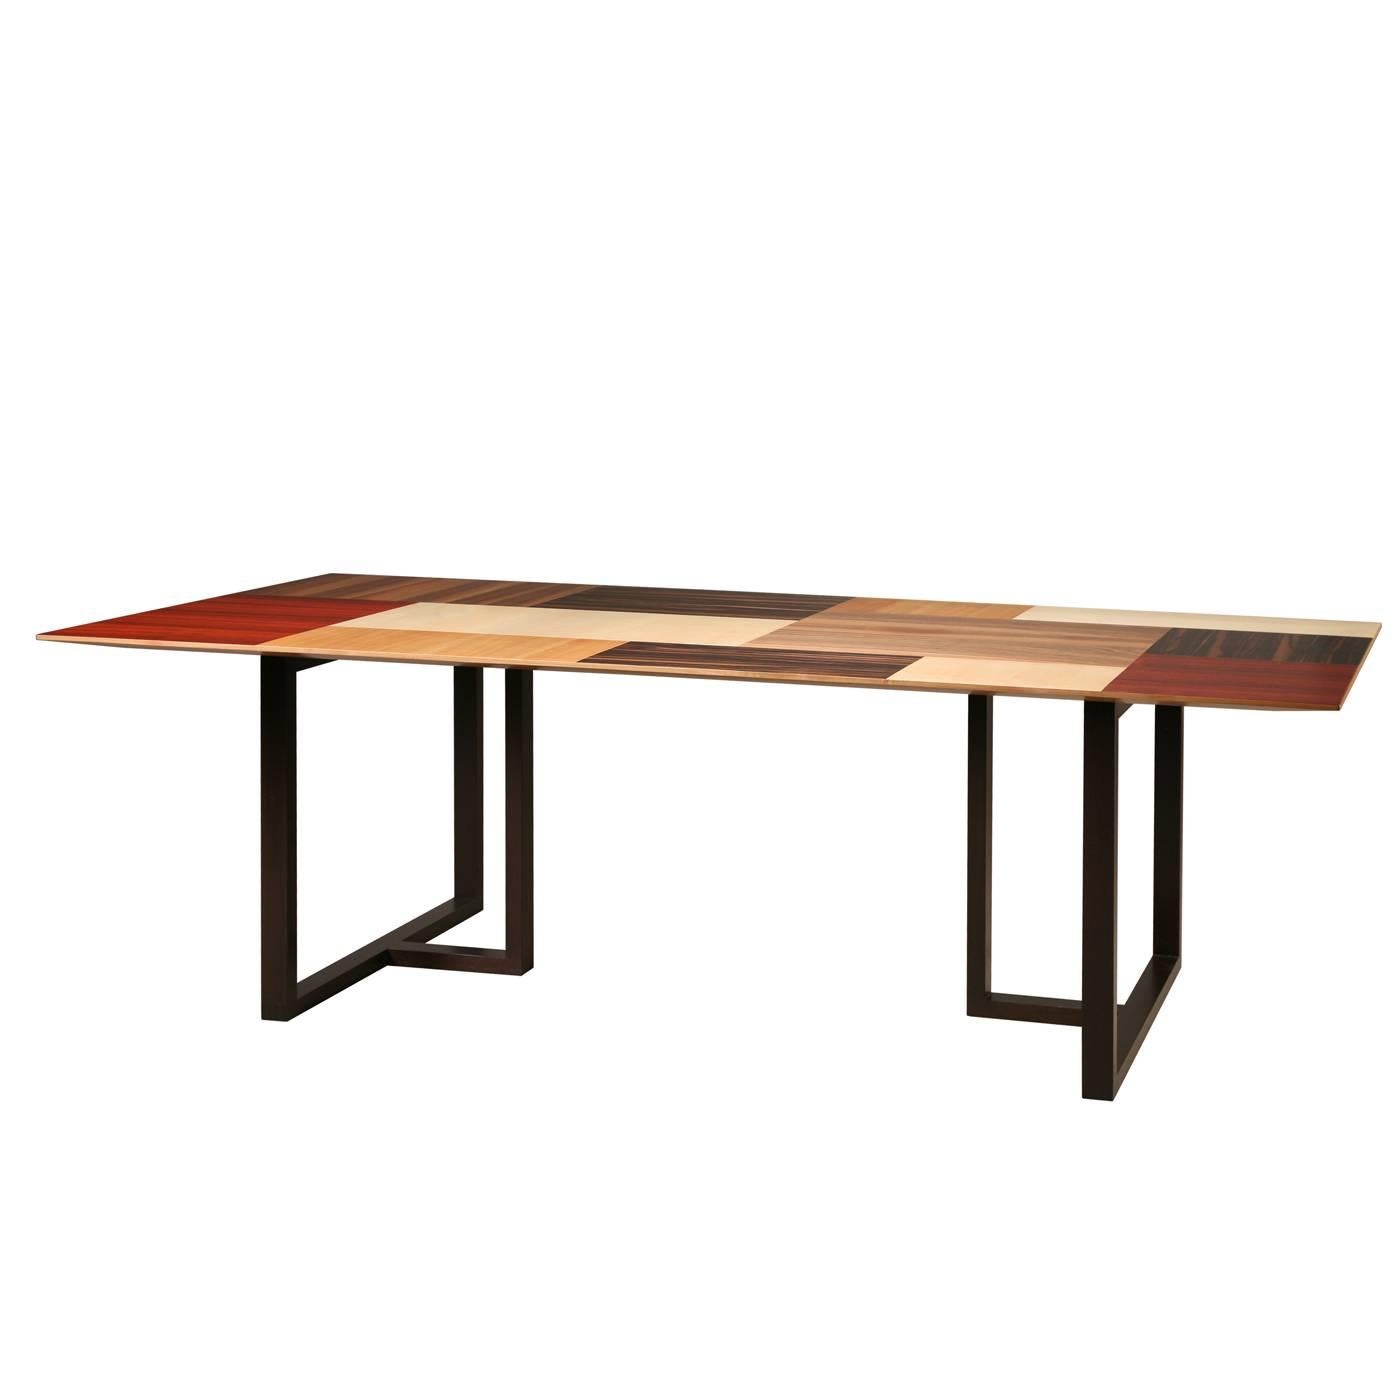 Part of the Patchwork collection designed by Maurizio Duranti for Morelato, this dining table features a top made of patches of different wood: wenge, walnut, maple, padauk, ebony, and cherry. The result is a playful piece that will make a modern